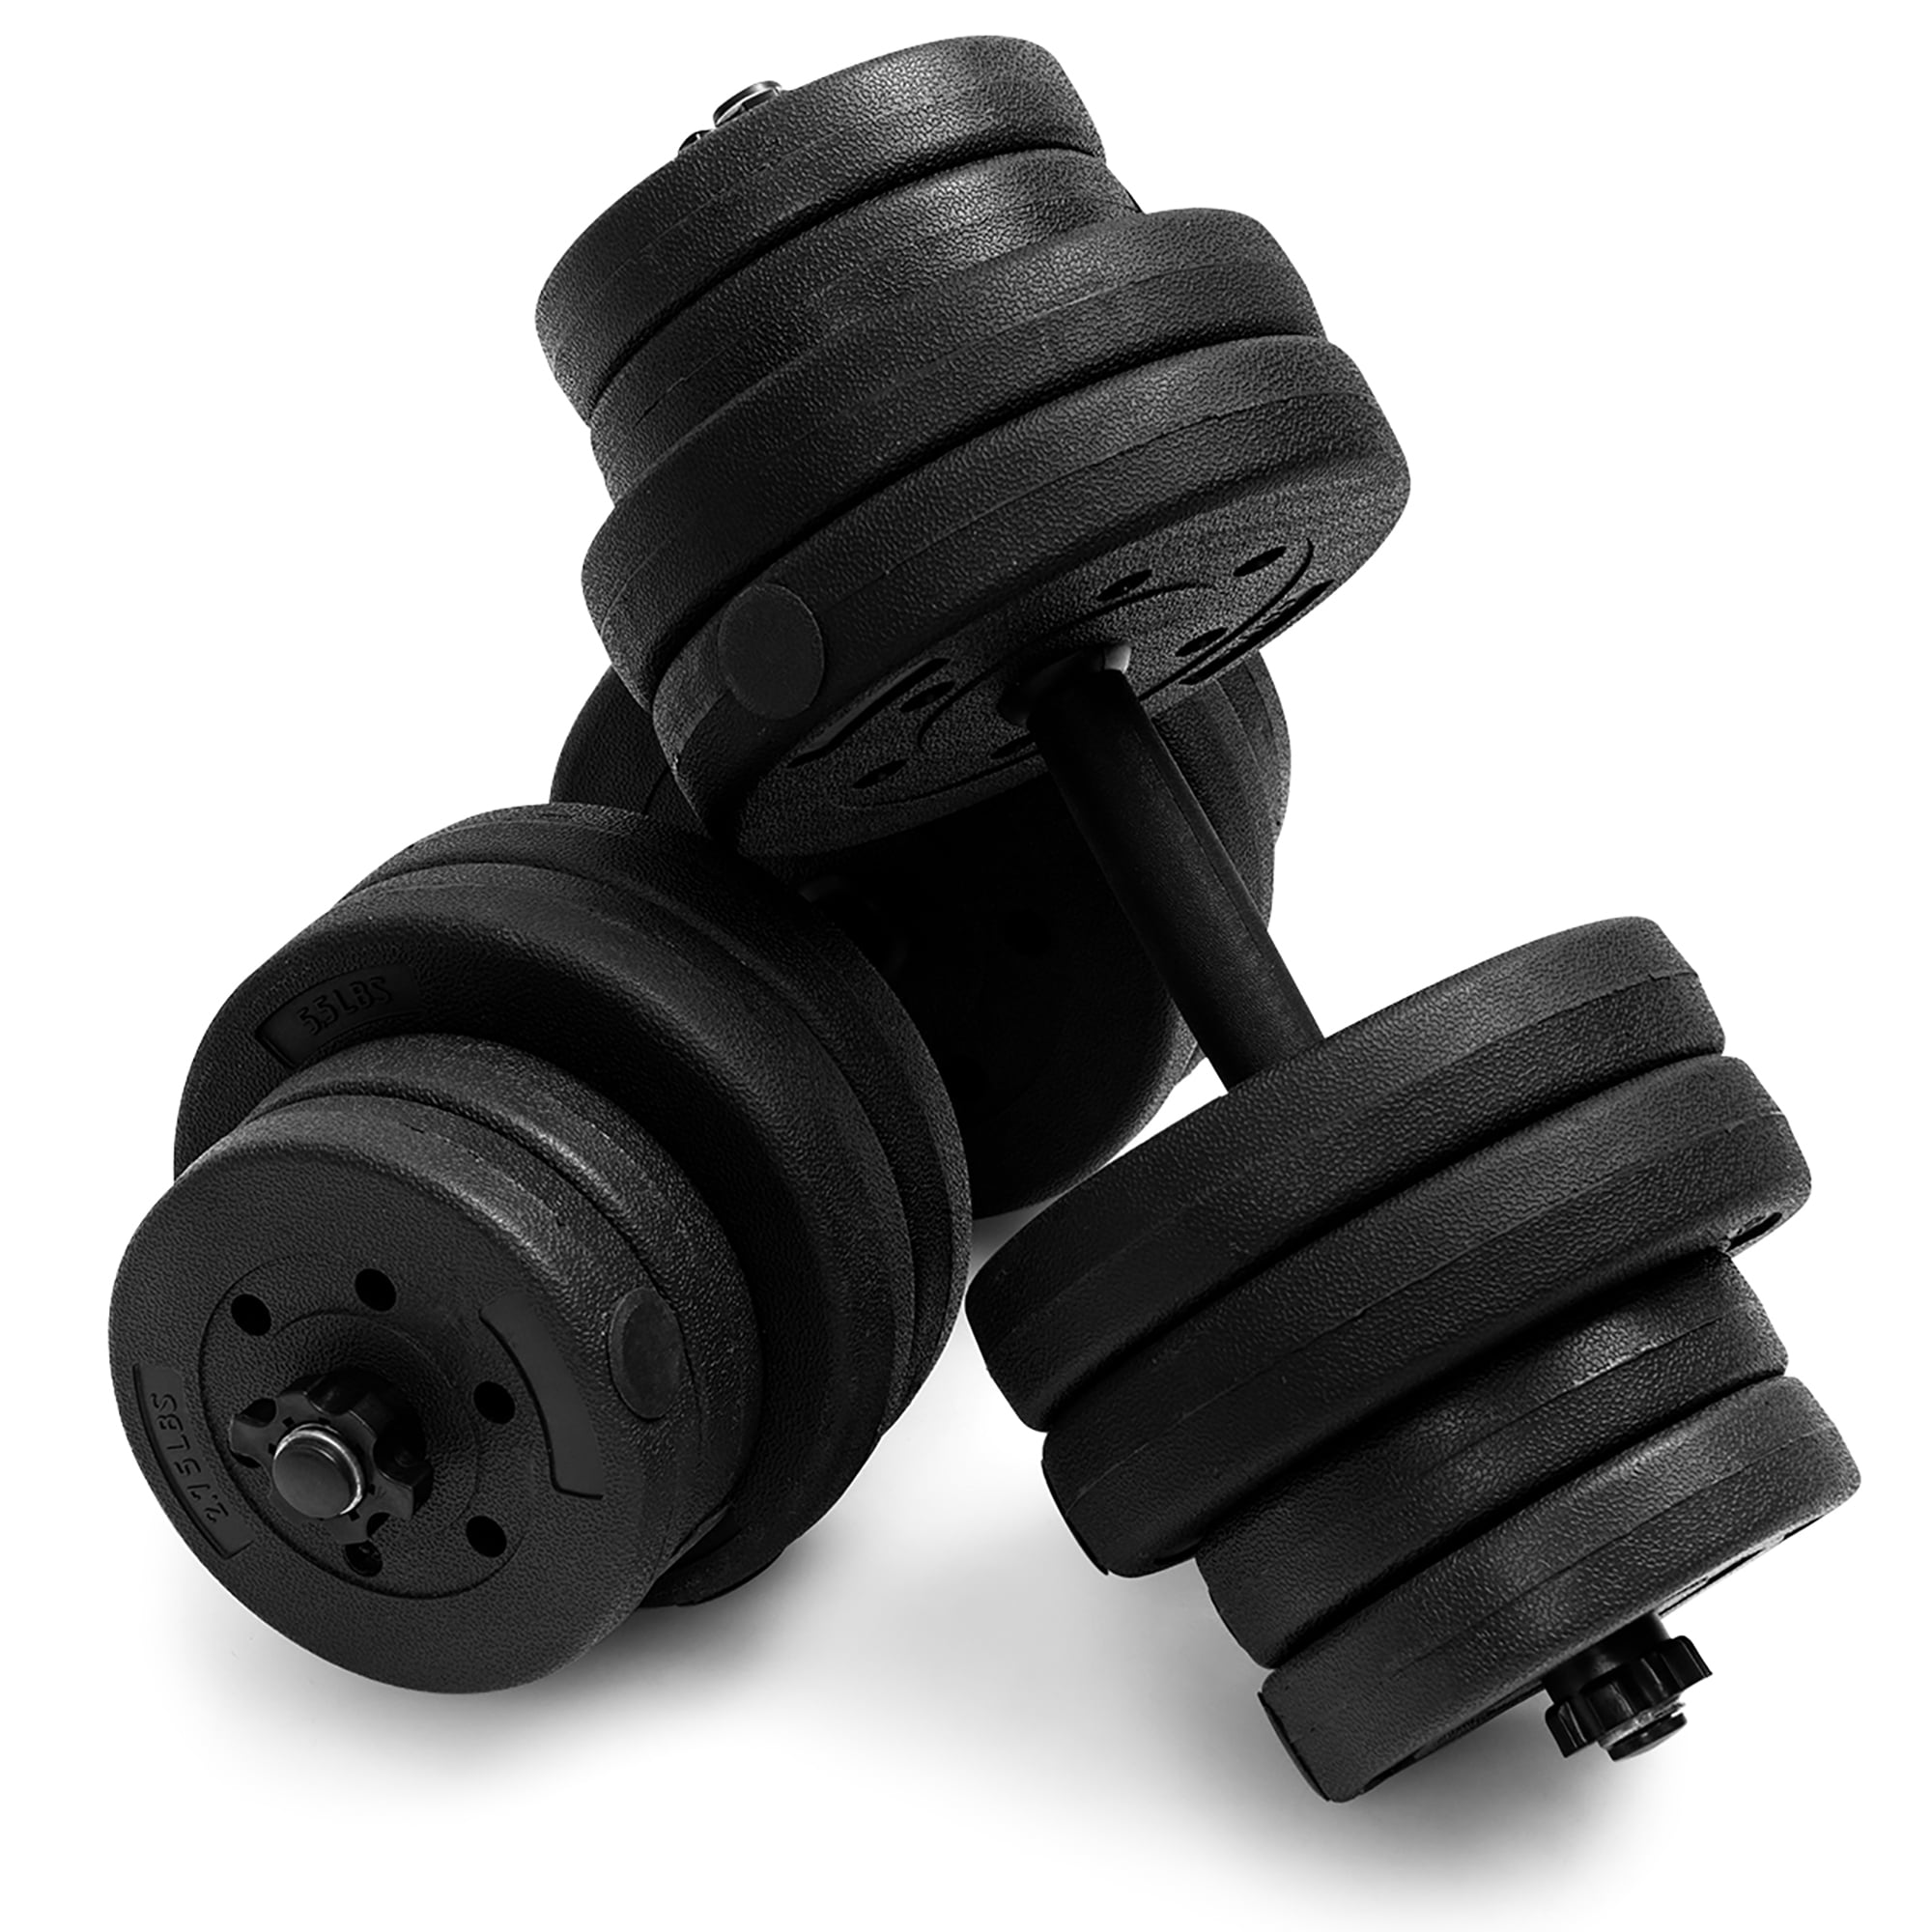 YES4ALL DUMBBELL SET 105 LBS ADJUSTABLE WEIGHT CAST IRON DUMBBELLS FITNESS GYM 